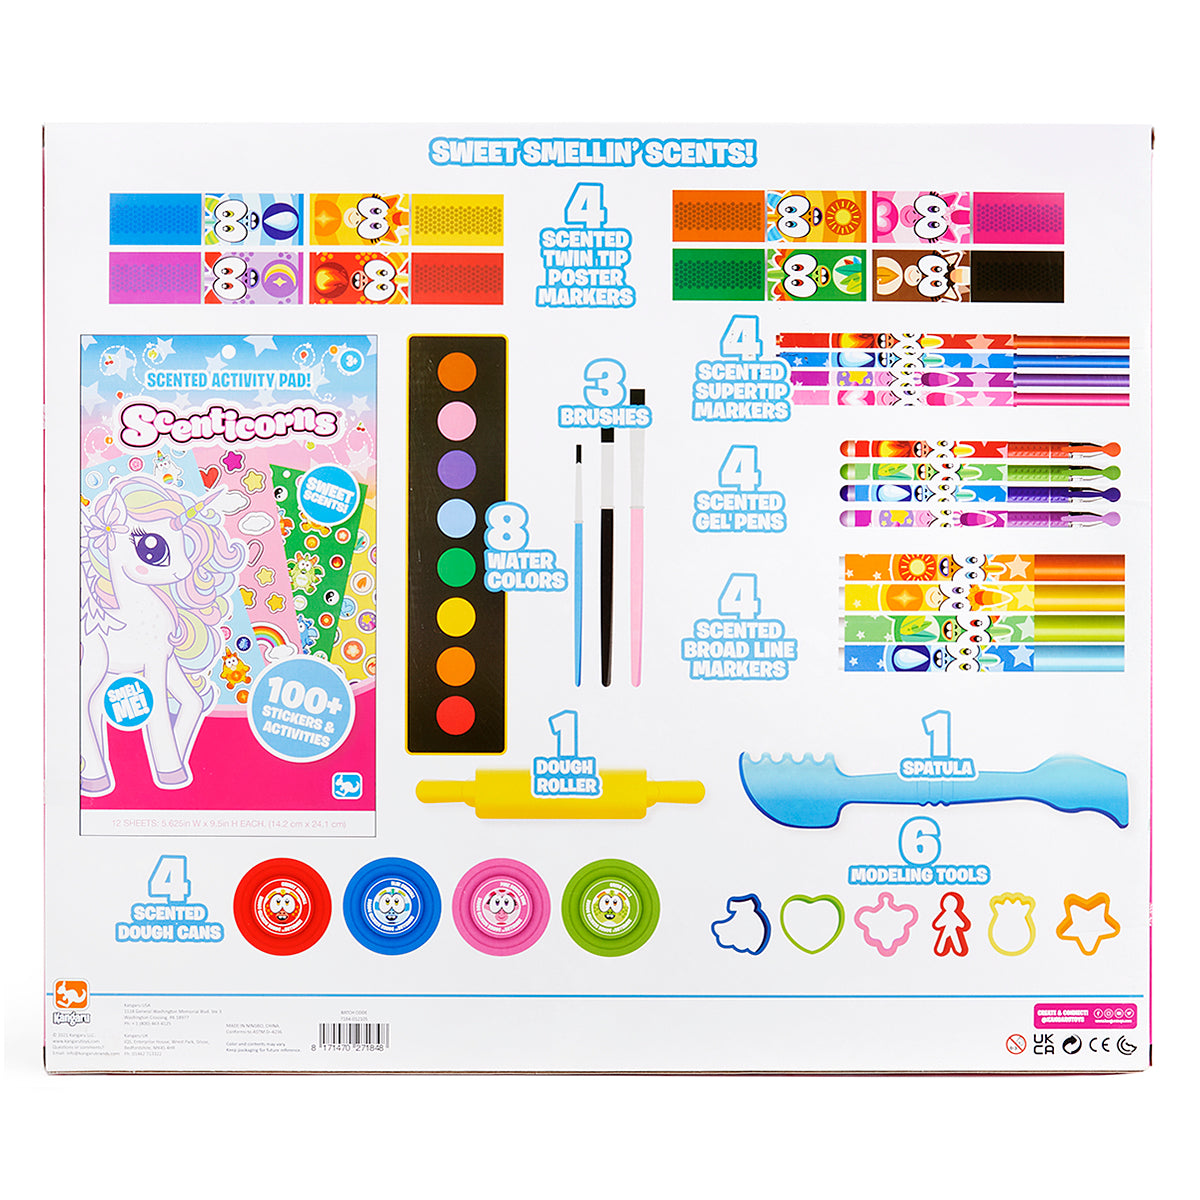 Kids Drawing Kit, Scenticorns Travel Activity Set, Children's Lap Desk to Go Coloring Kit - Scented Markers, Crayons, Stickers, Sketch Pad - Travel